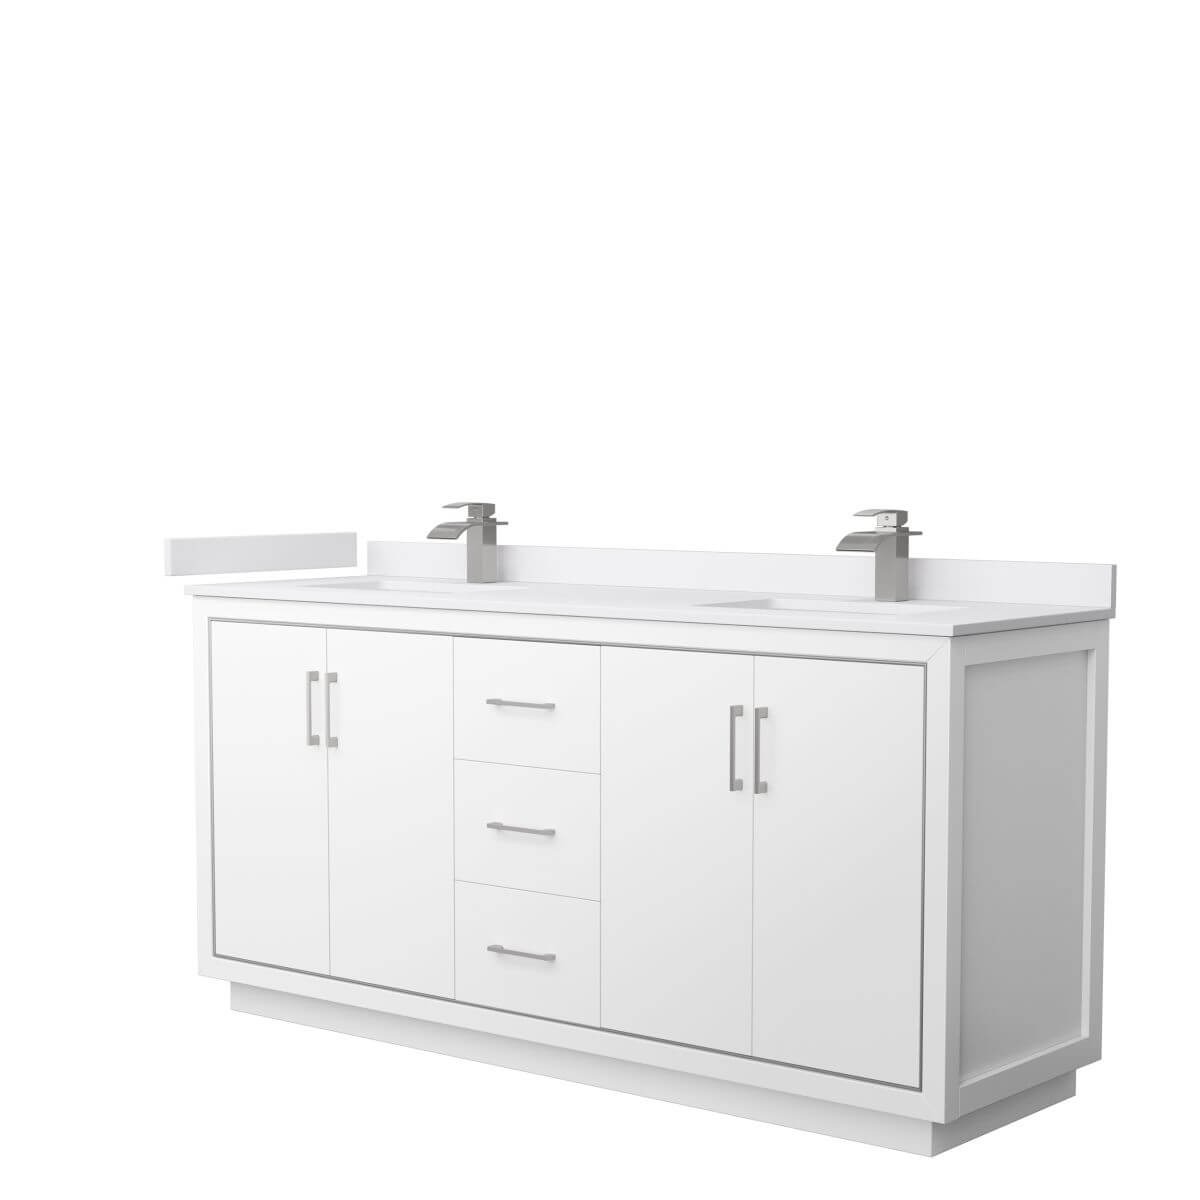 Wyndham Collection WCF111172DWHWCUNSMXX Icon 72 inch Double Bathroom Vanity in White with White Cultured Marble Countertop, Undermount Square Sinks and Brushed Nickel Trim